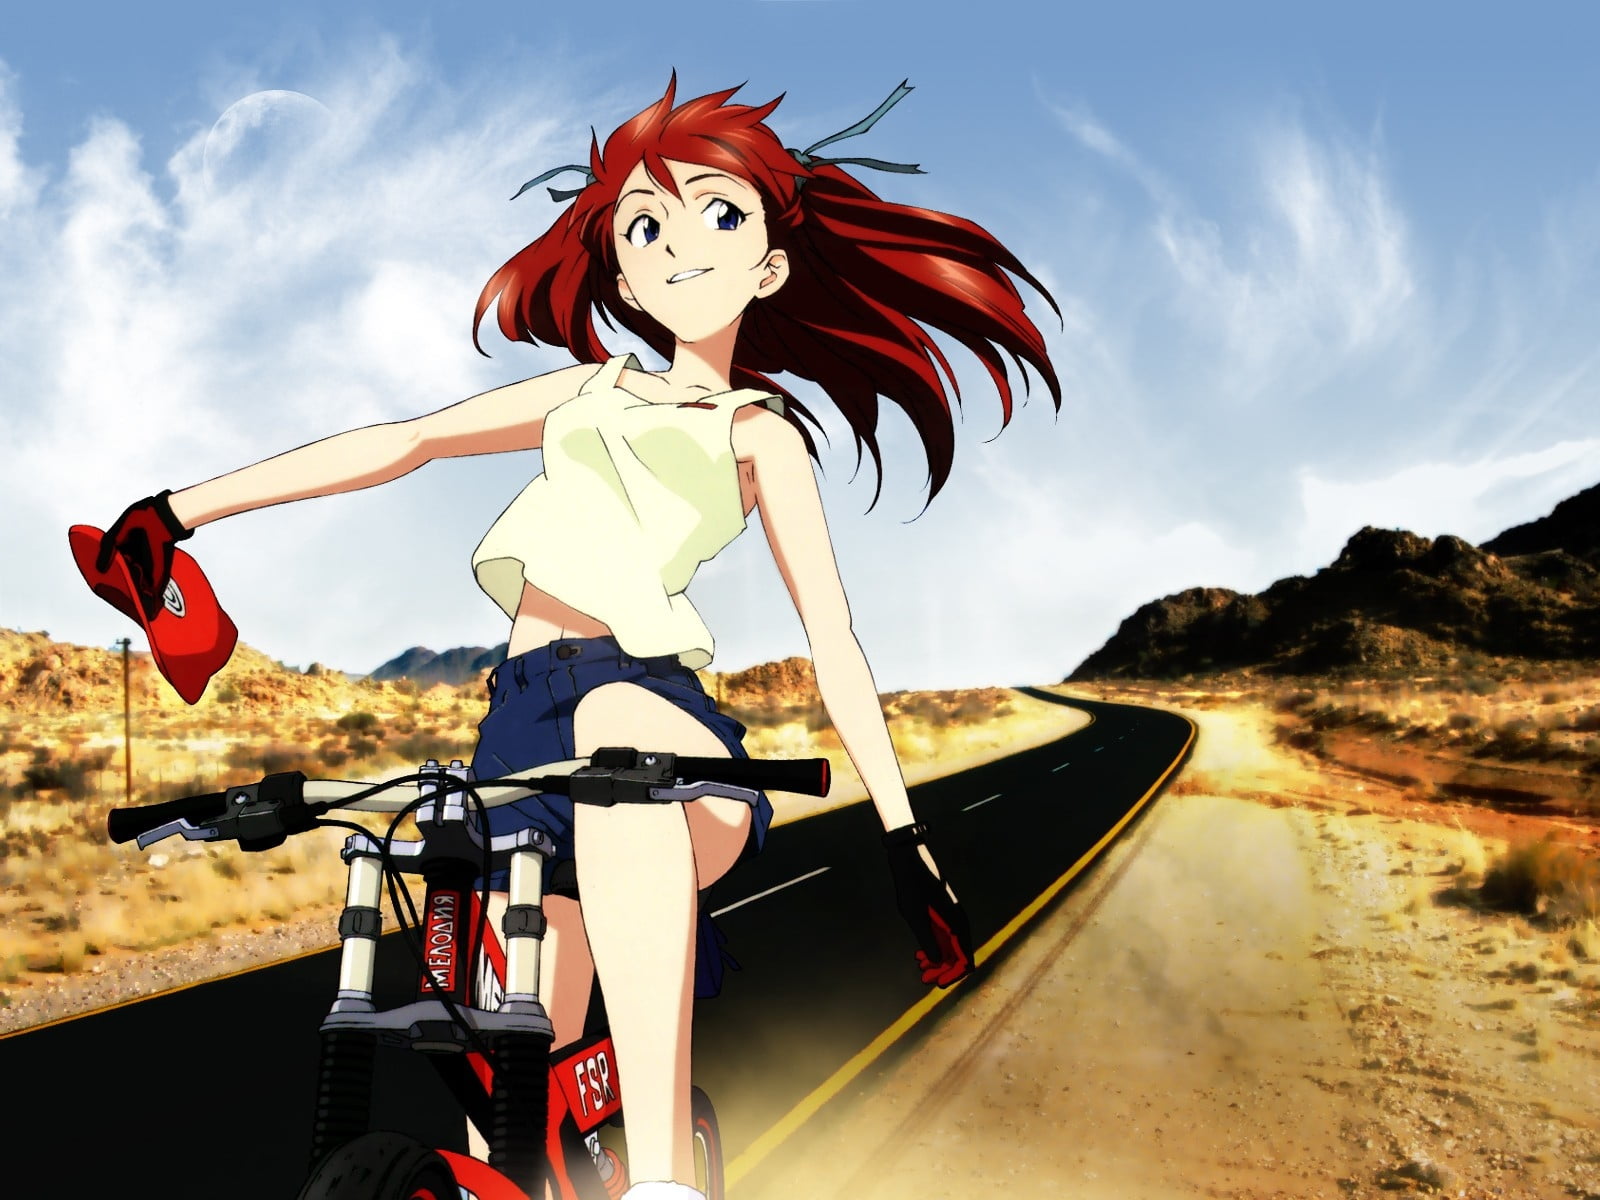 X Resolution Female Anime Character Riding Bicycle Hd Wallpaper